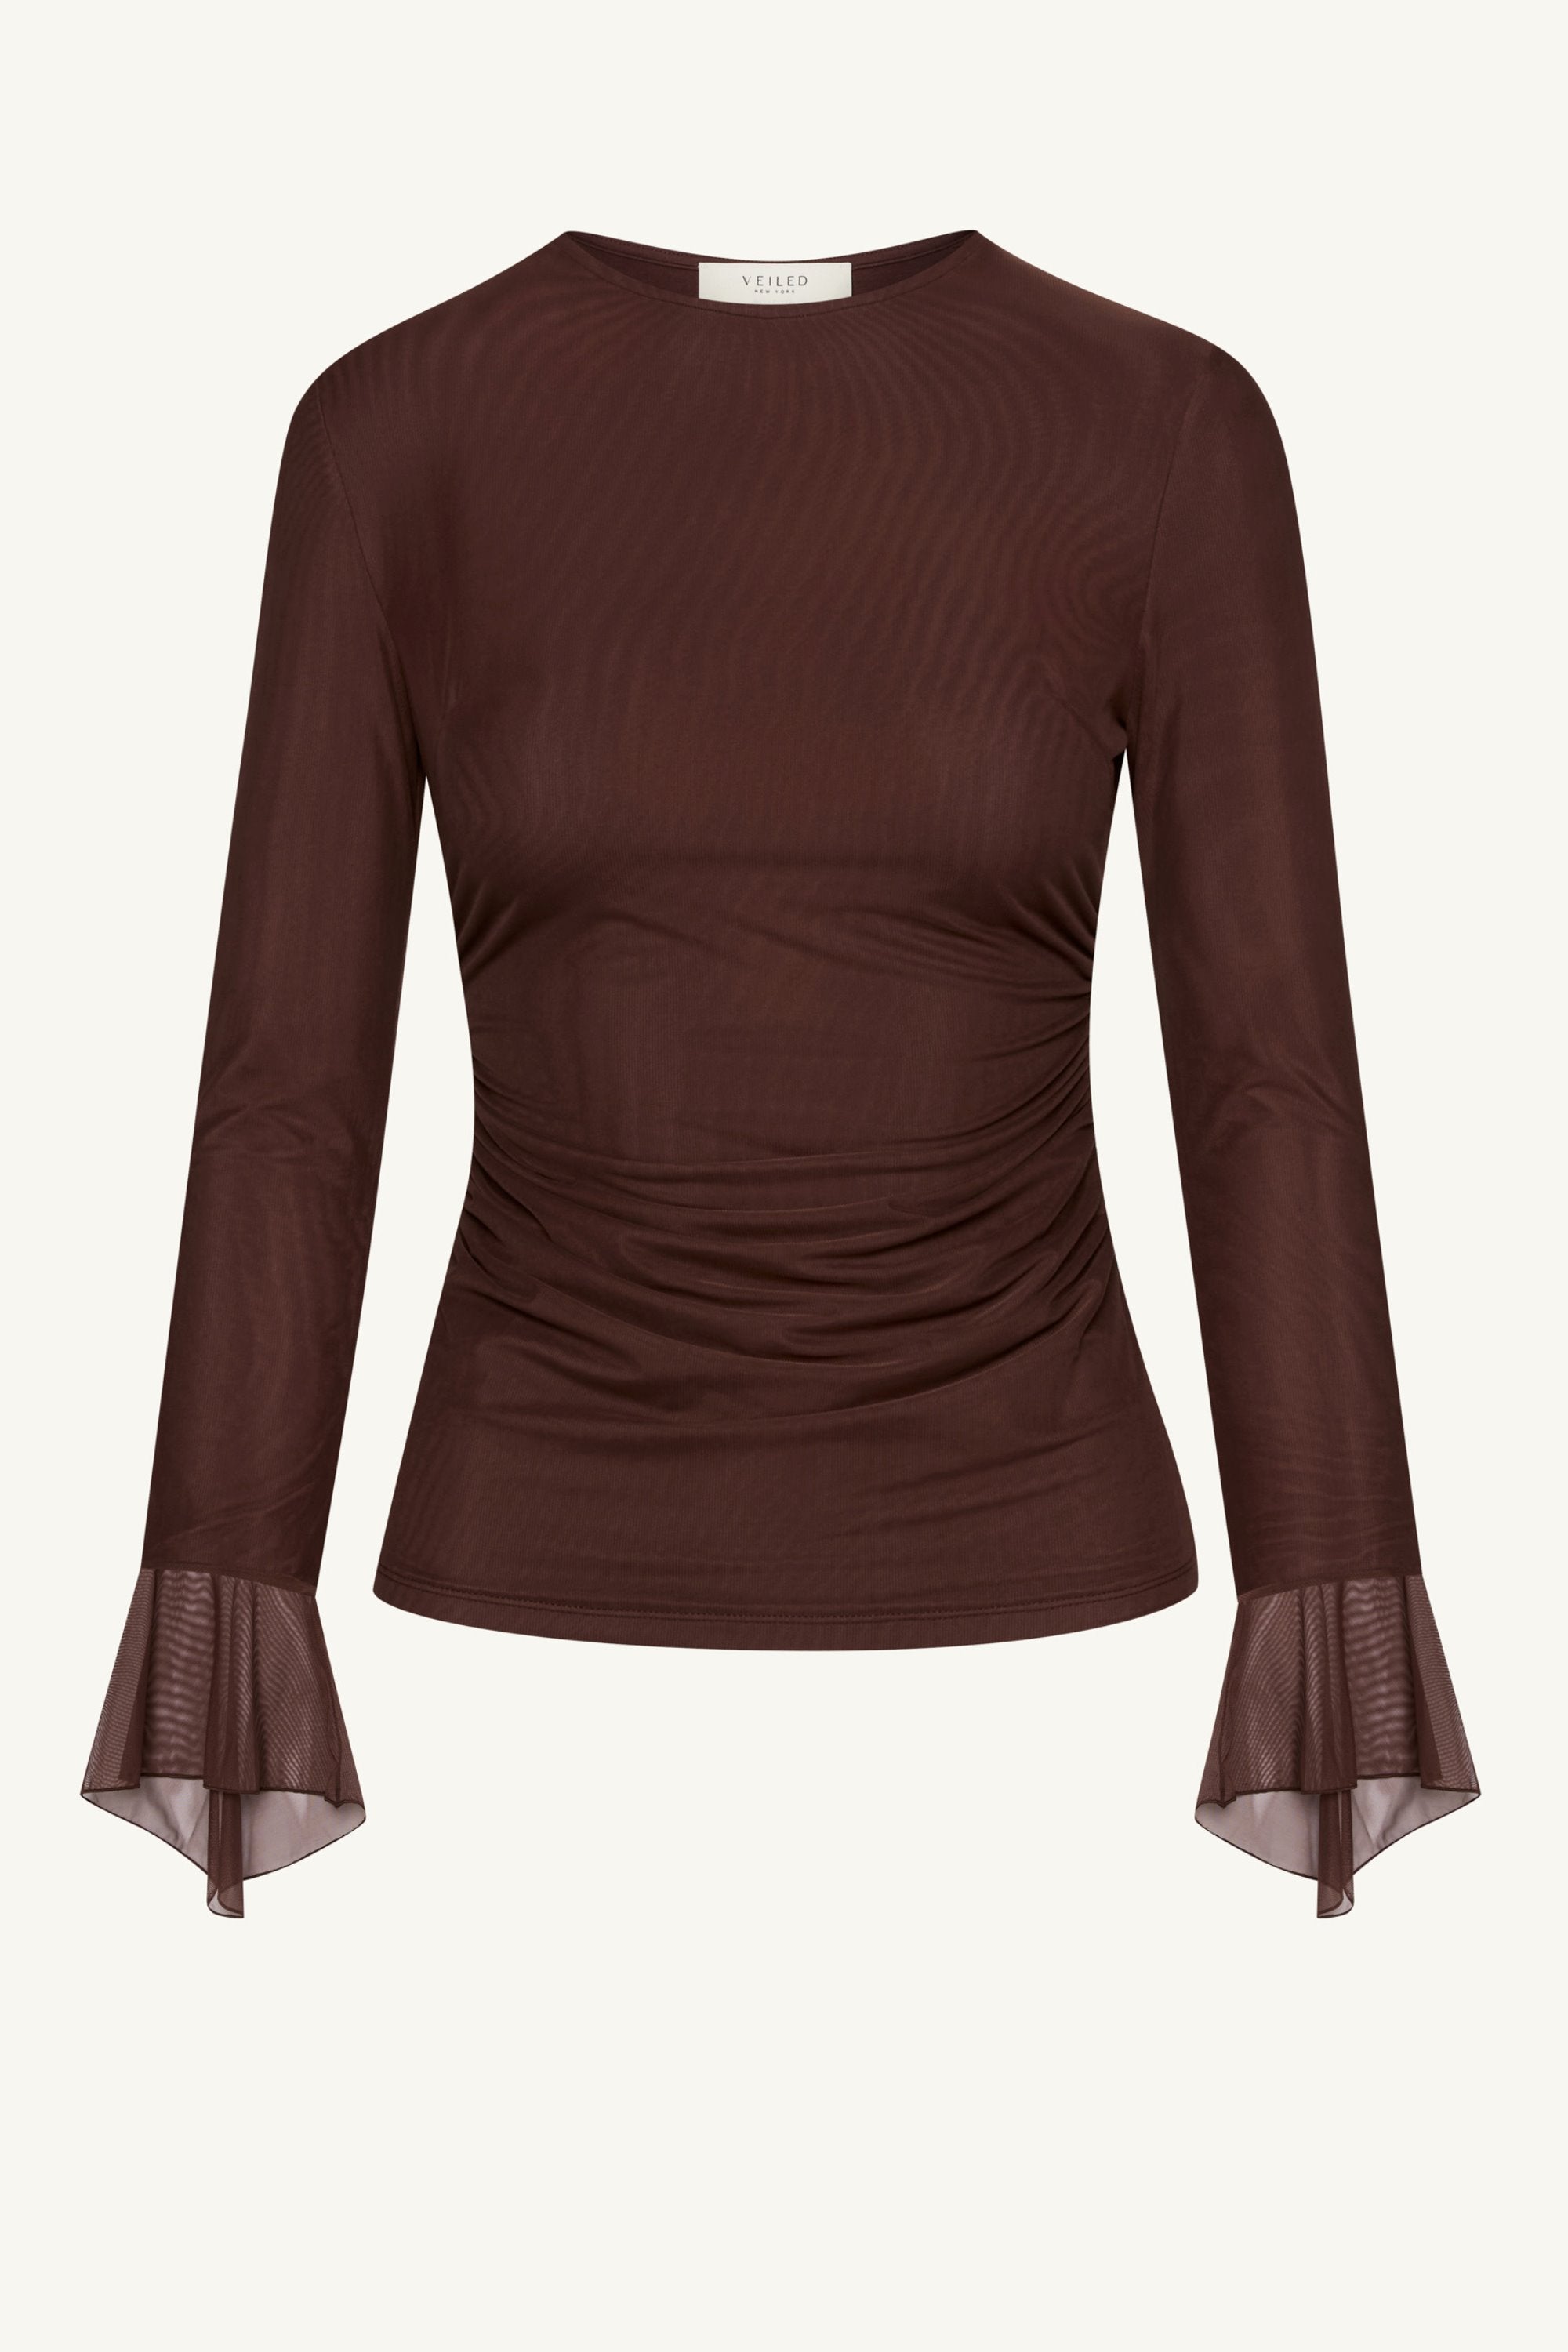 Lolita Rouched Mesh Top - Espresso Clothing epschoolboard 